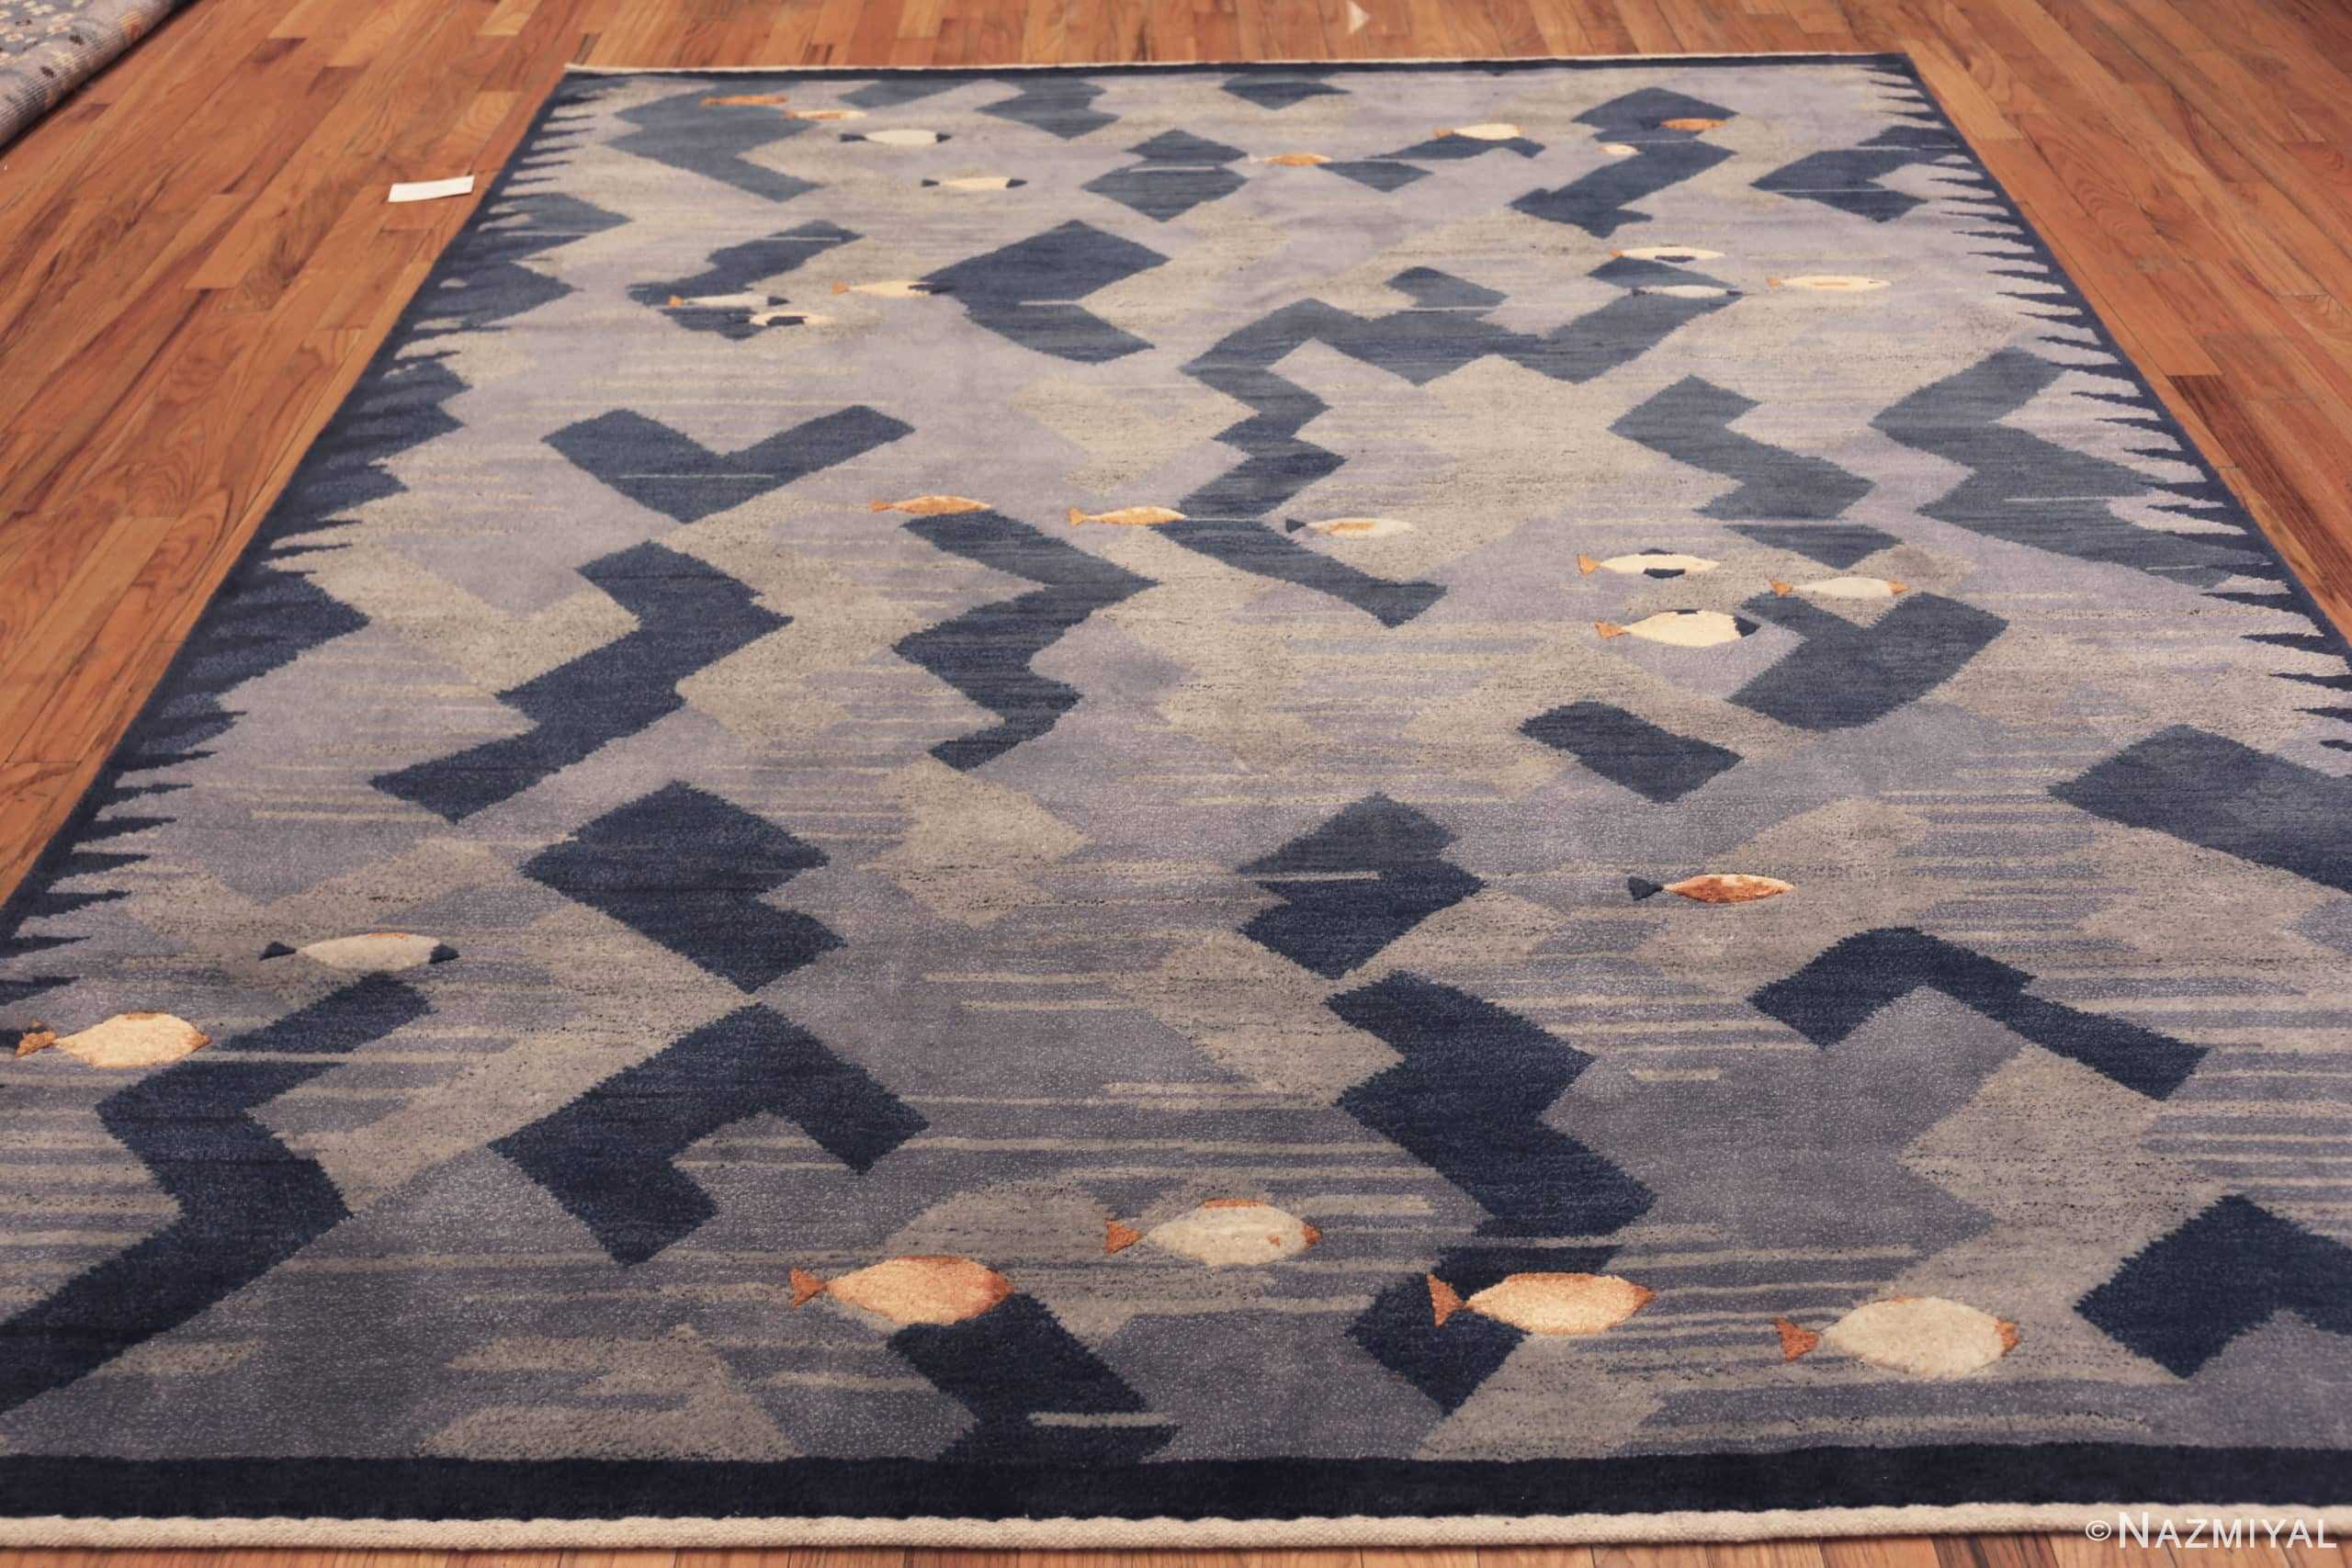 Whole View Of Fish Design Modern Swedish Inspired Rug 60991 by Nazmiyal Antique Rugs